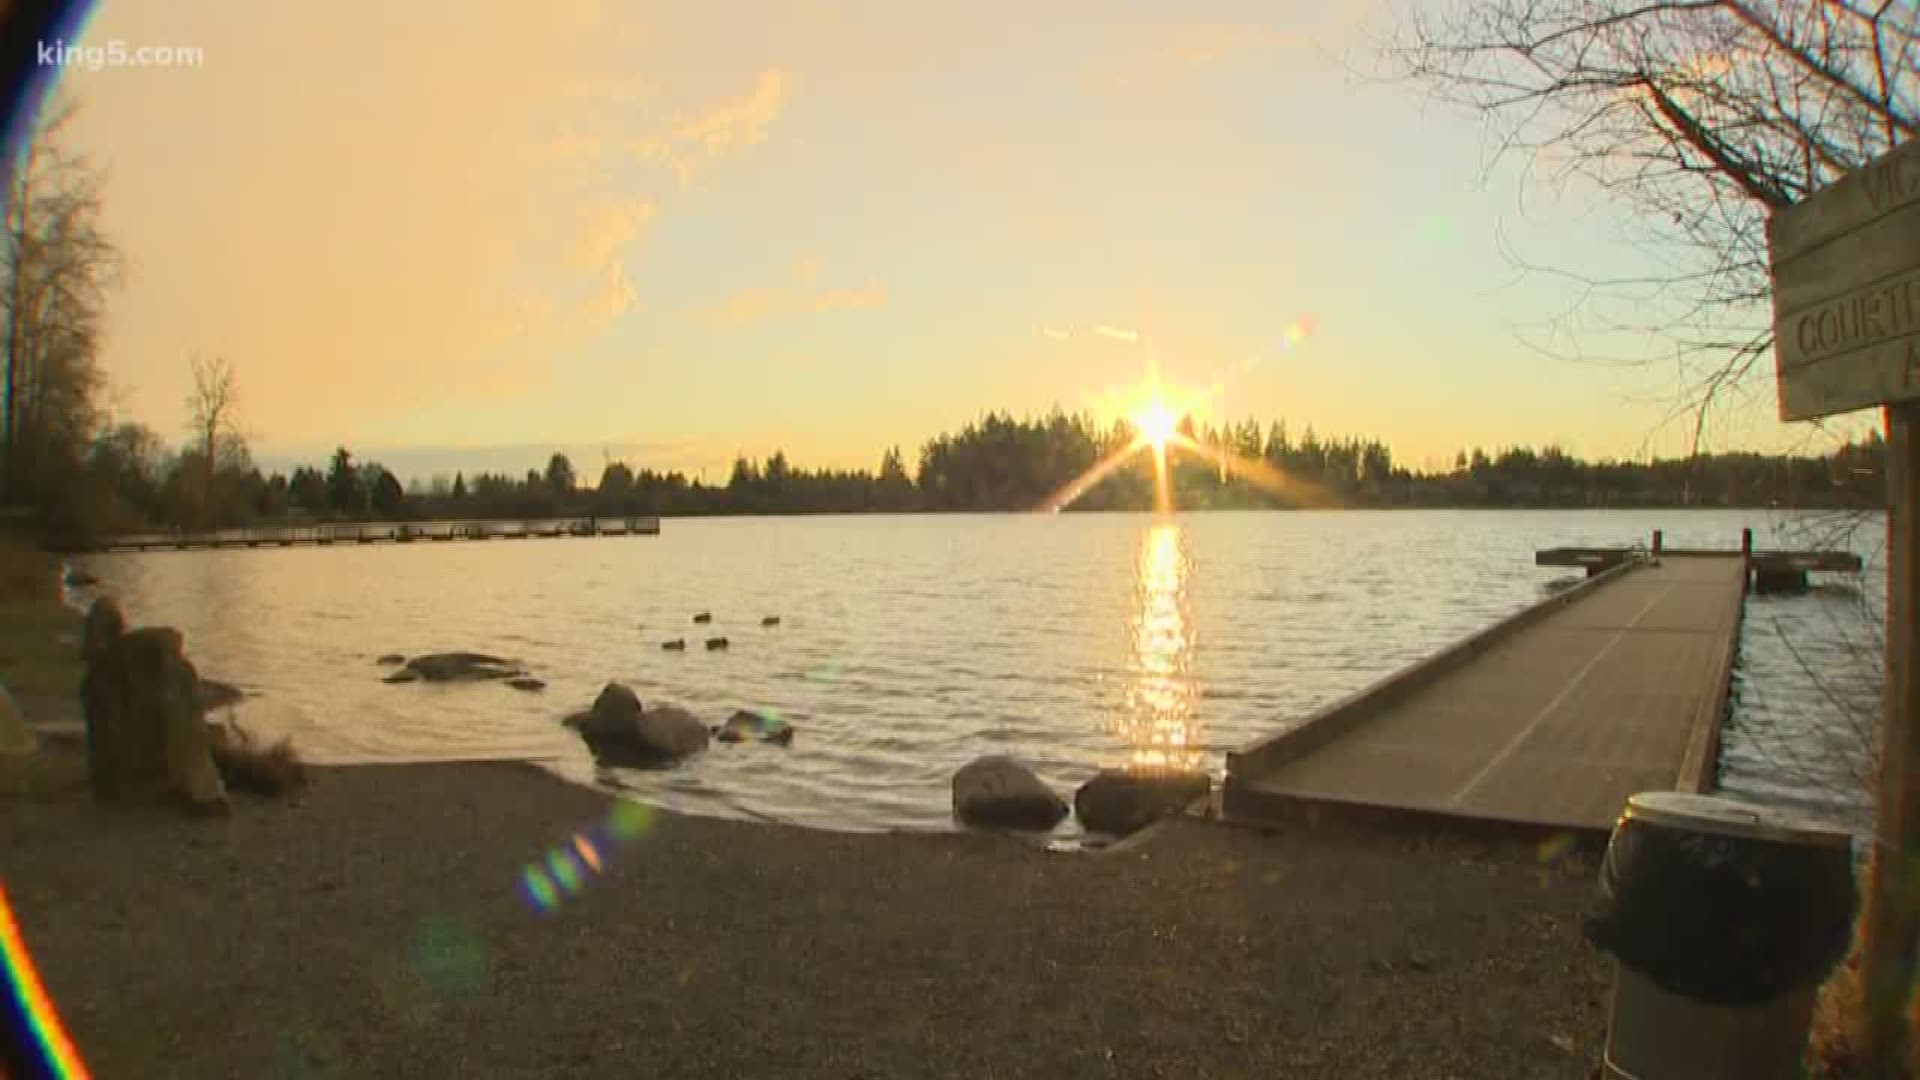 A Snohomish community wants a closer and more consistent look at what is in Blackmans Lake. A non-profit organization that watches the water says the physical and chemical results are within normal limits, but that same group acknowledges there are variables they are not measuring for. Now there's a new effort to build a better database of information. KING 5's Natalie Swaby talks with the team taking on that challenge.